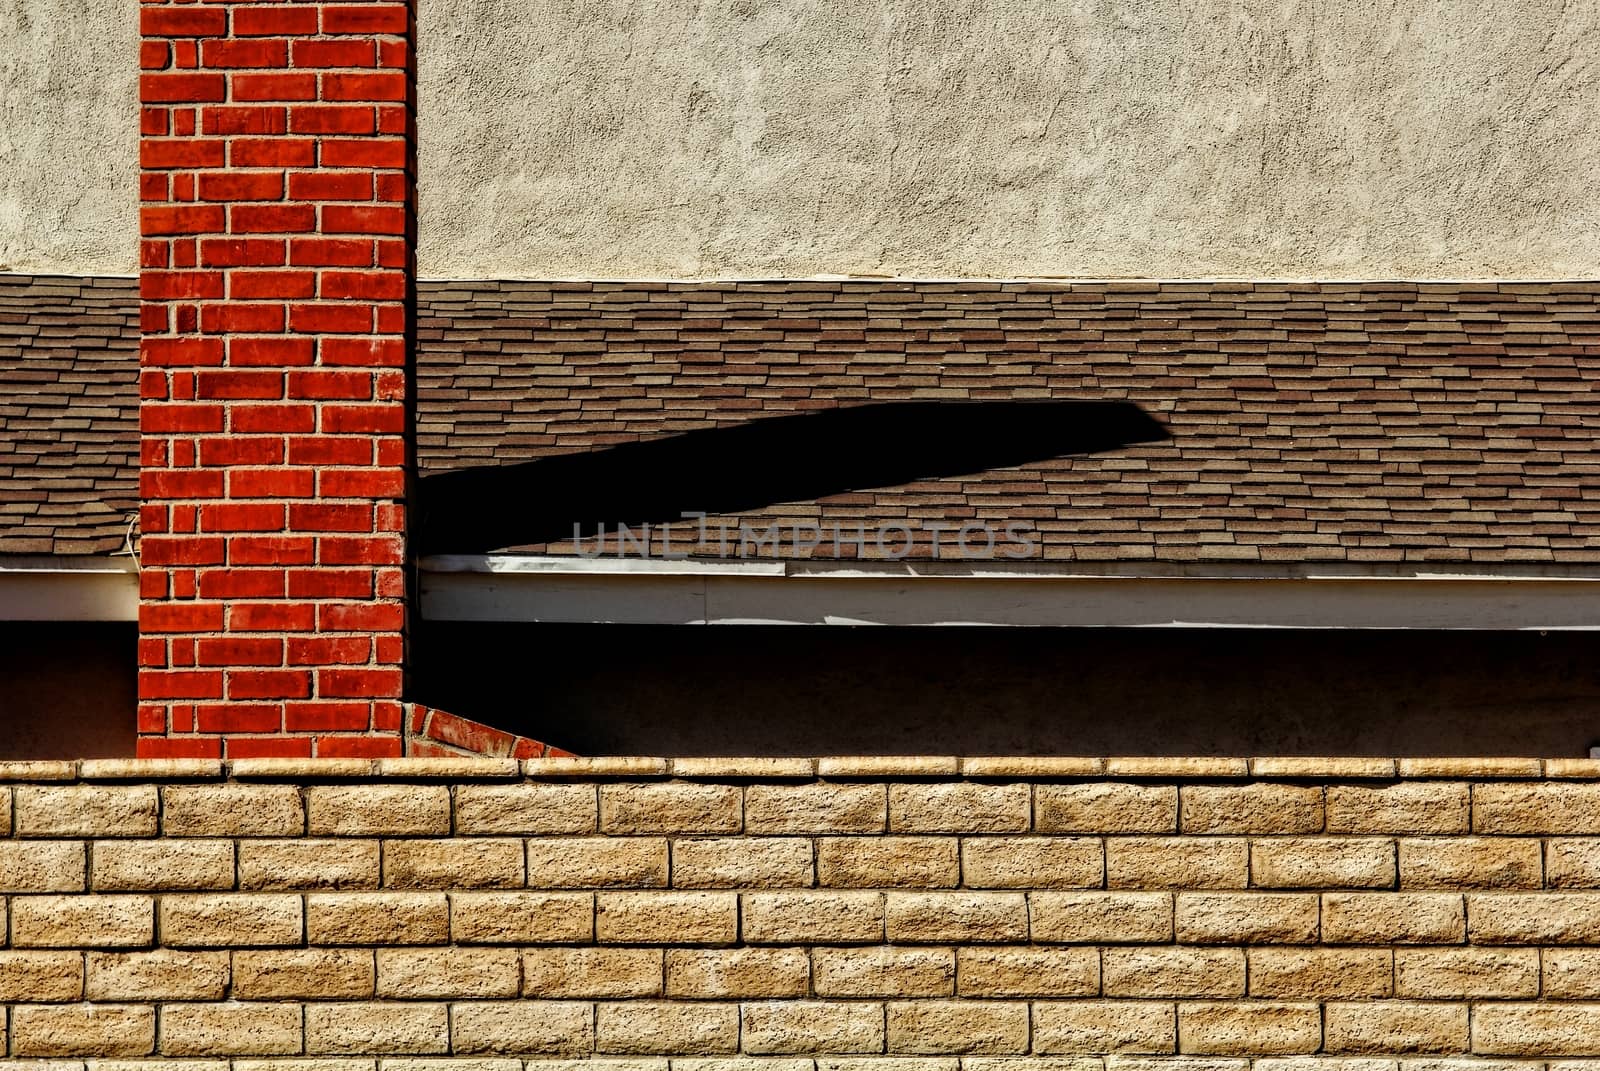 Brick chimney with roof and brick wall.